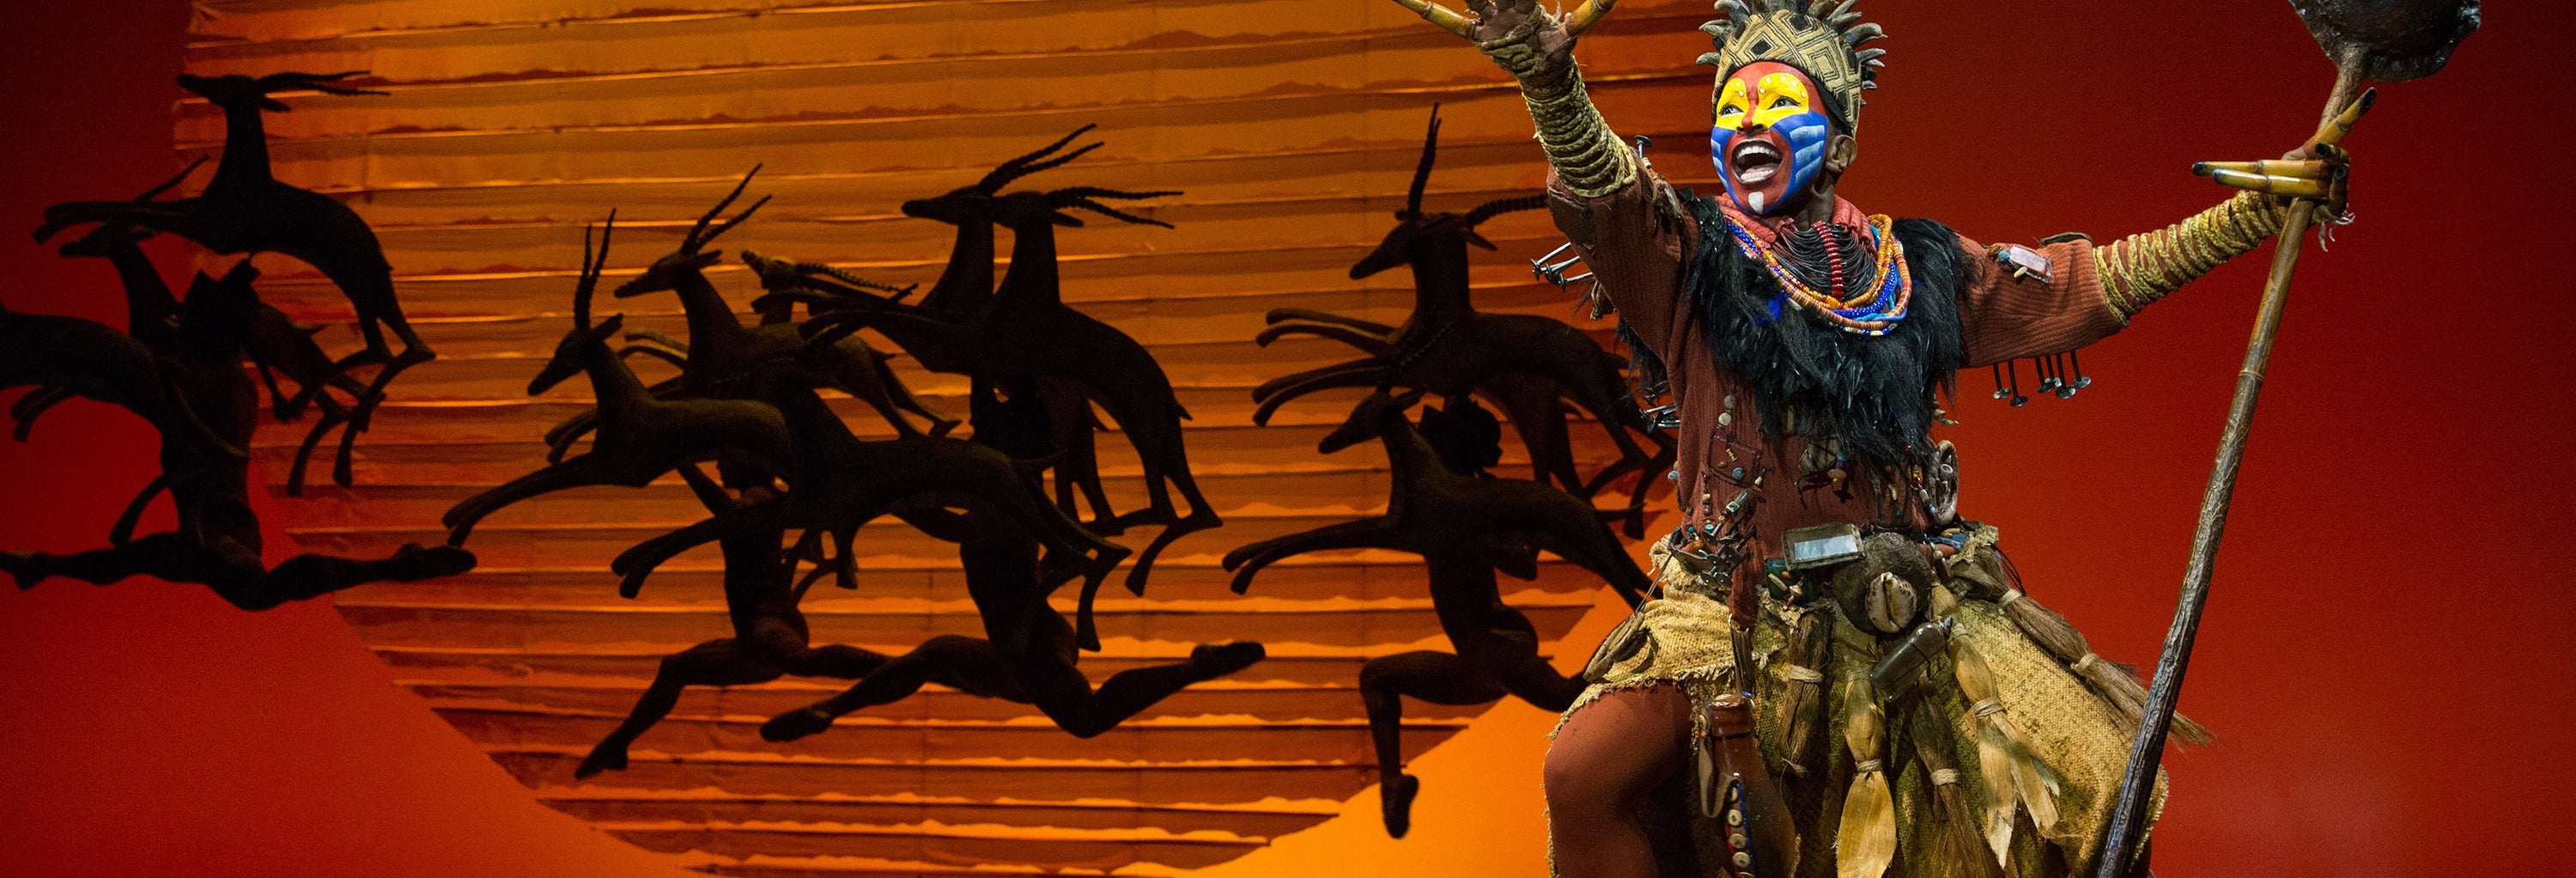 download the lion king broadway discount tickets